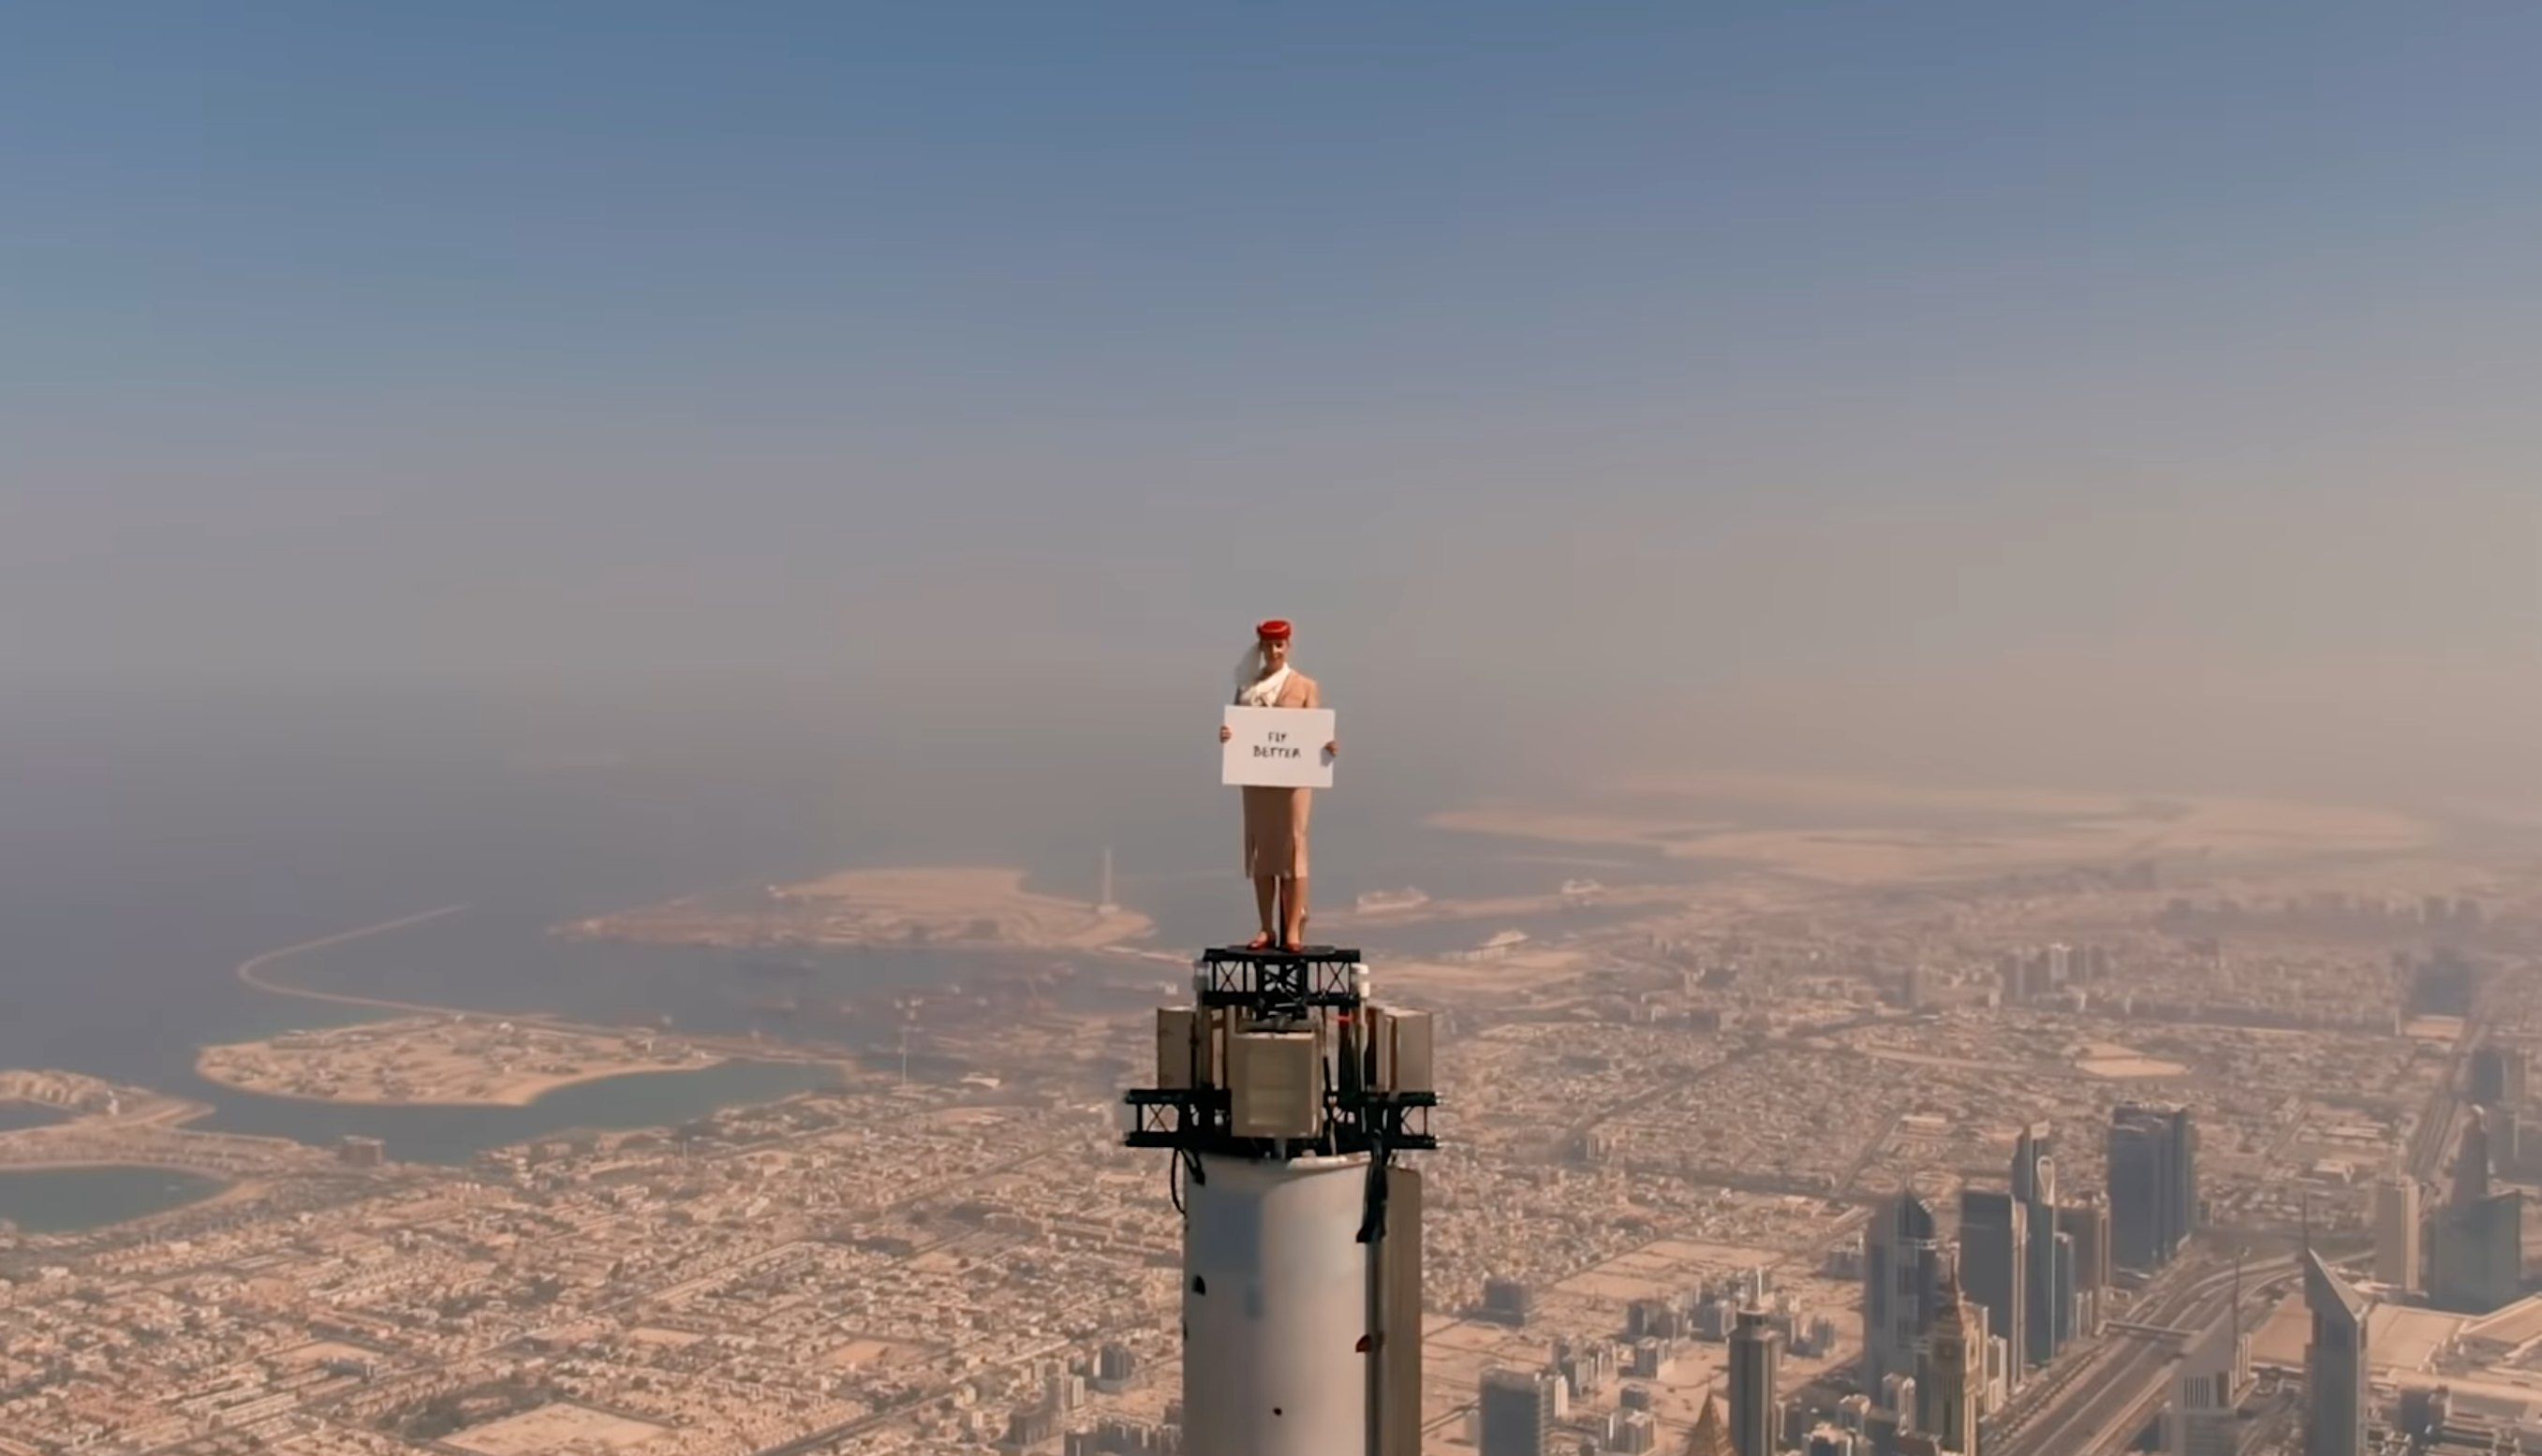 Emirates Really Put a Flight Attendant On Top of the World�s Tallest Building in Crazy Marketing Stunt